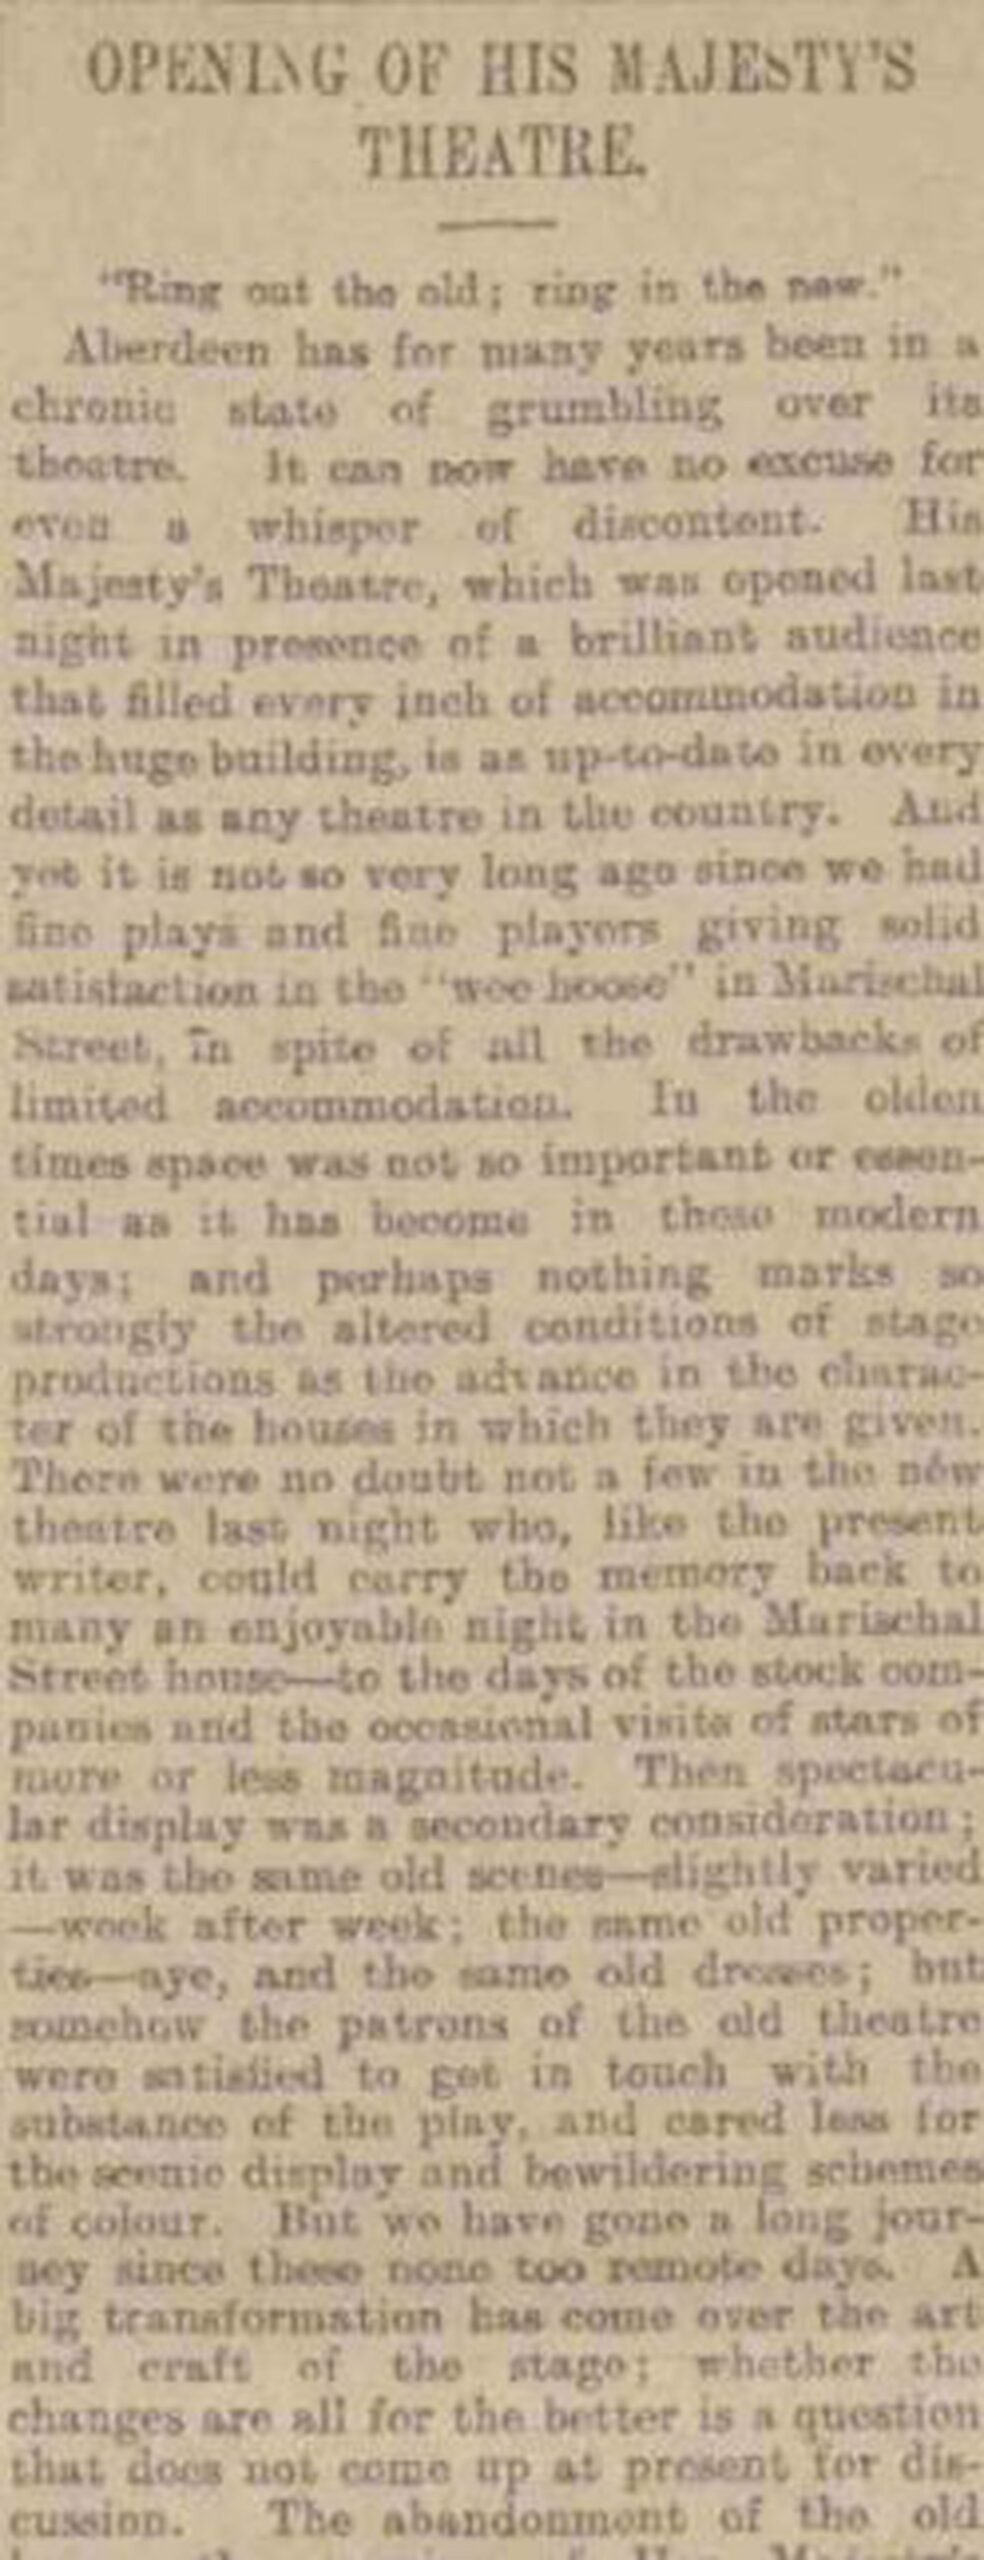 A small section of the article in The Aberdeen Journal which described the opening of the city's His Majesty's Theatre in 1906